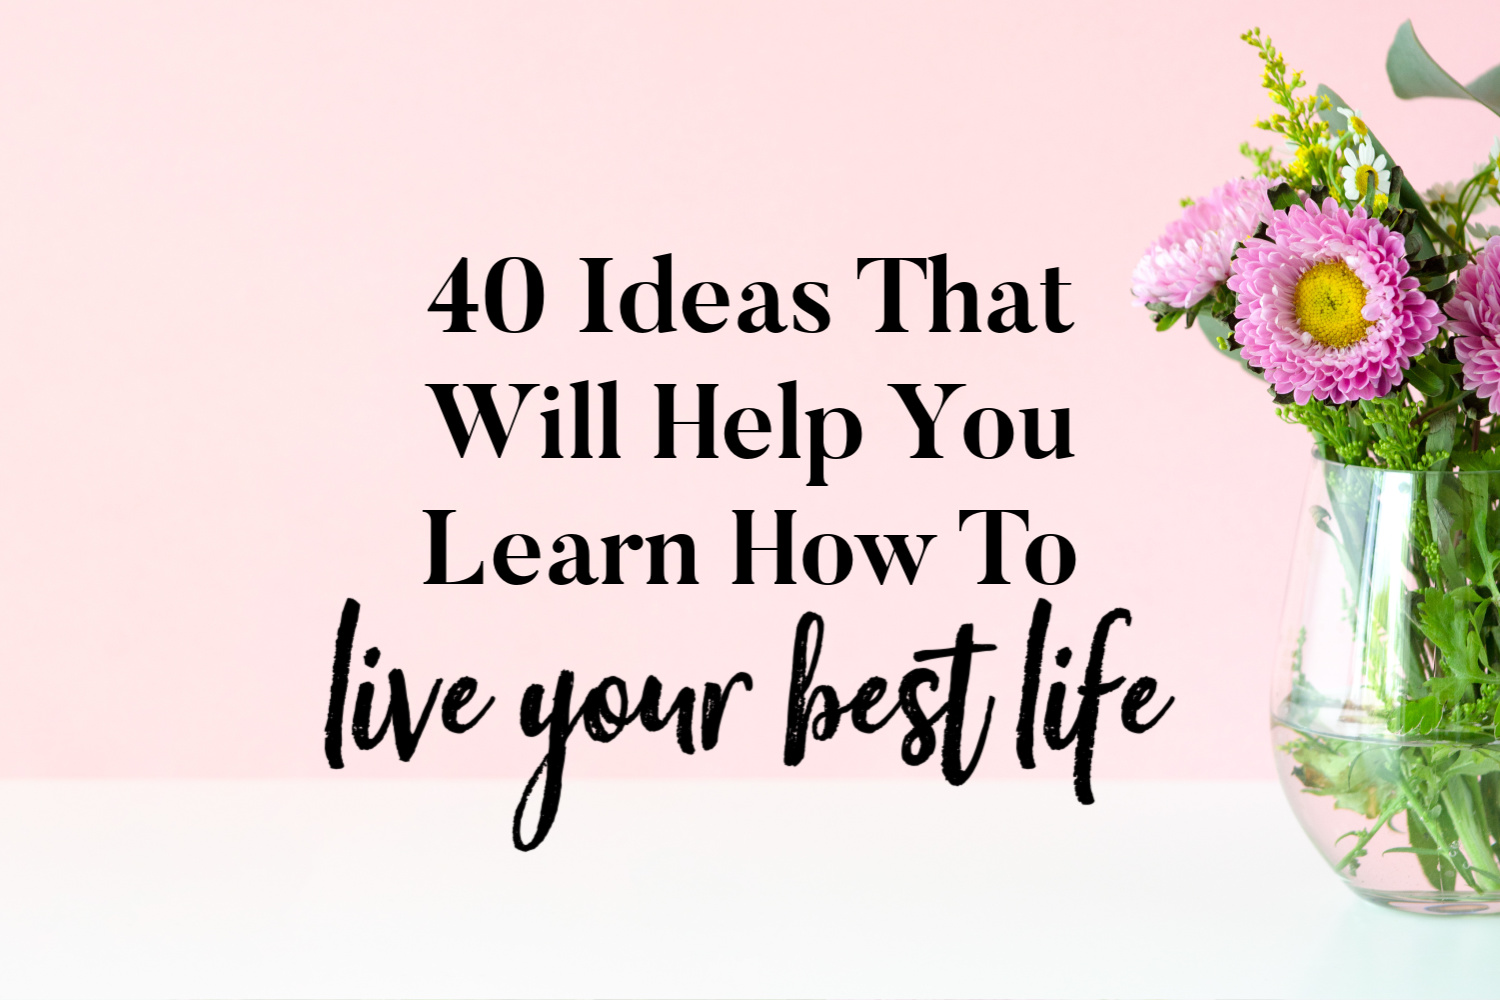 https://www.makingsenseofcents.com/wp-content/uploads/2020/01/40-Ideas-That-Will-Help-You-Learn-How-To-Live-Your-Best-Life-copy.jpg